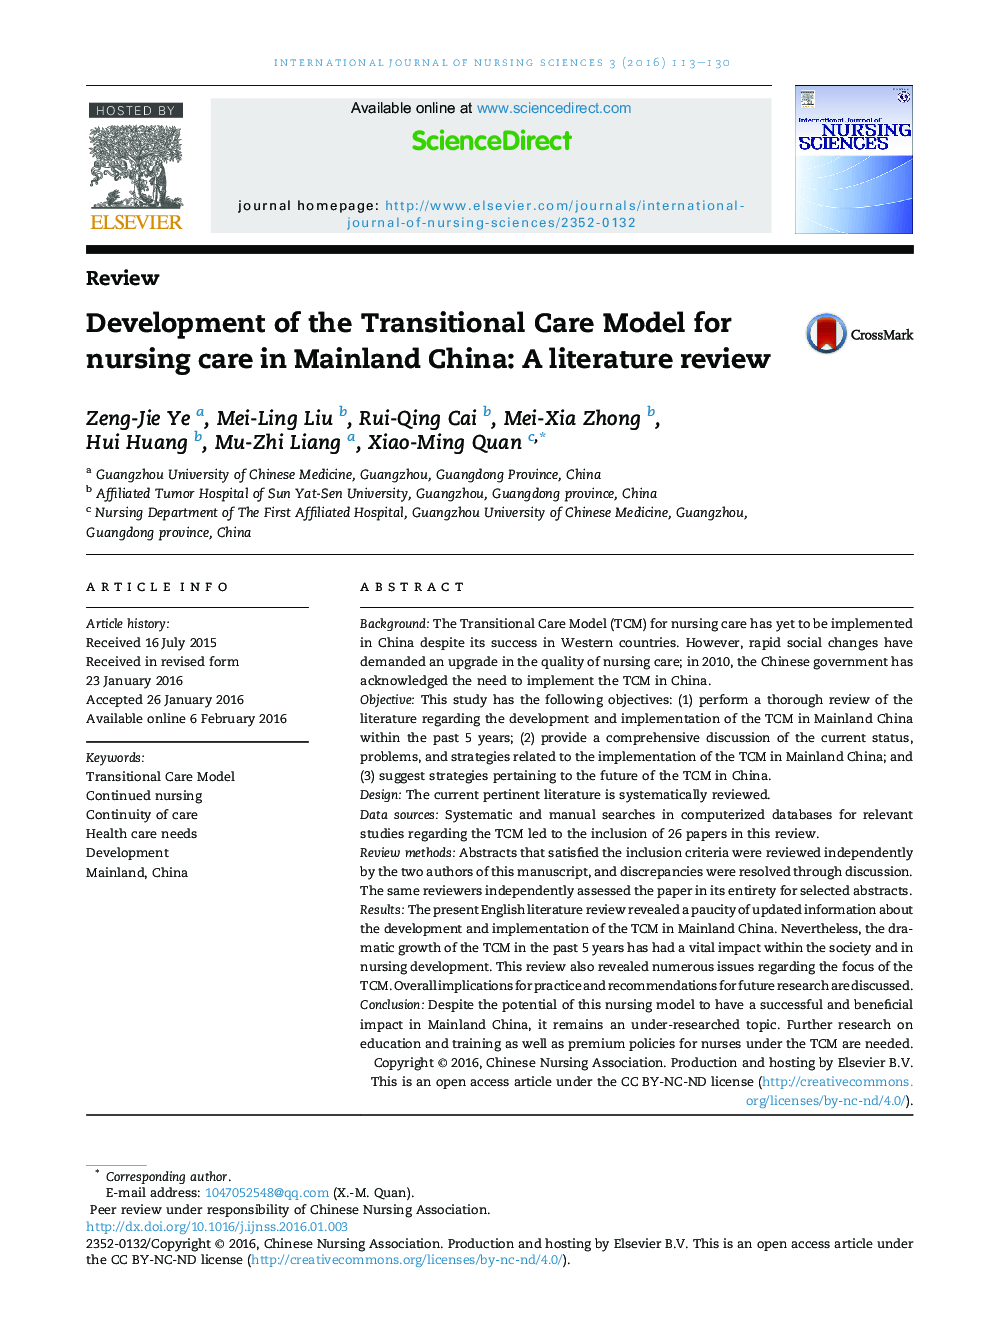 Development of the Transitional Care Model for nursing care in Mainland China: A literature review 